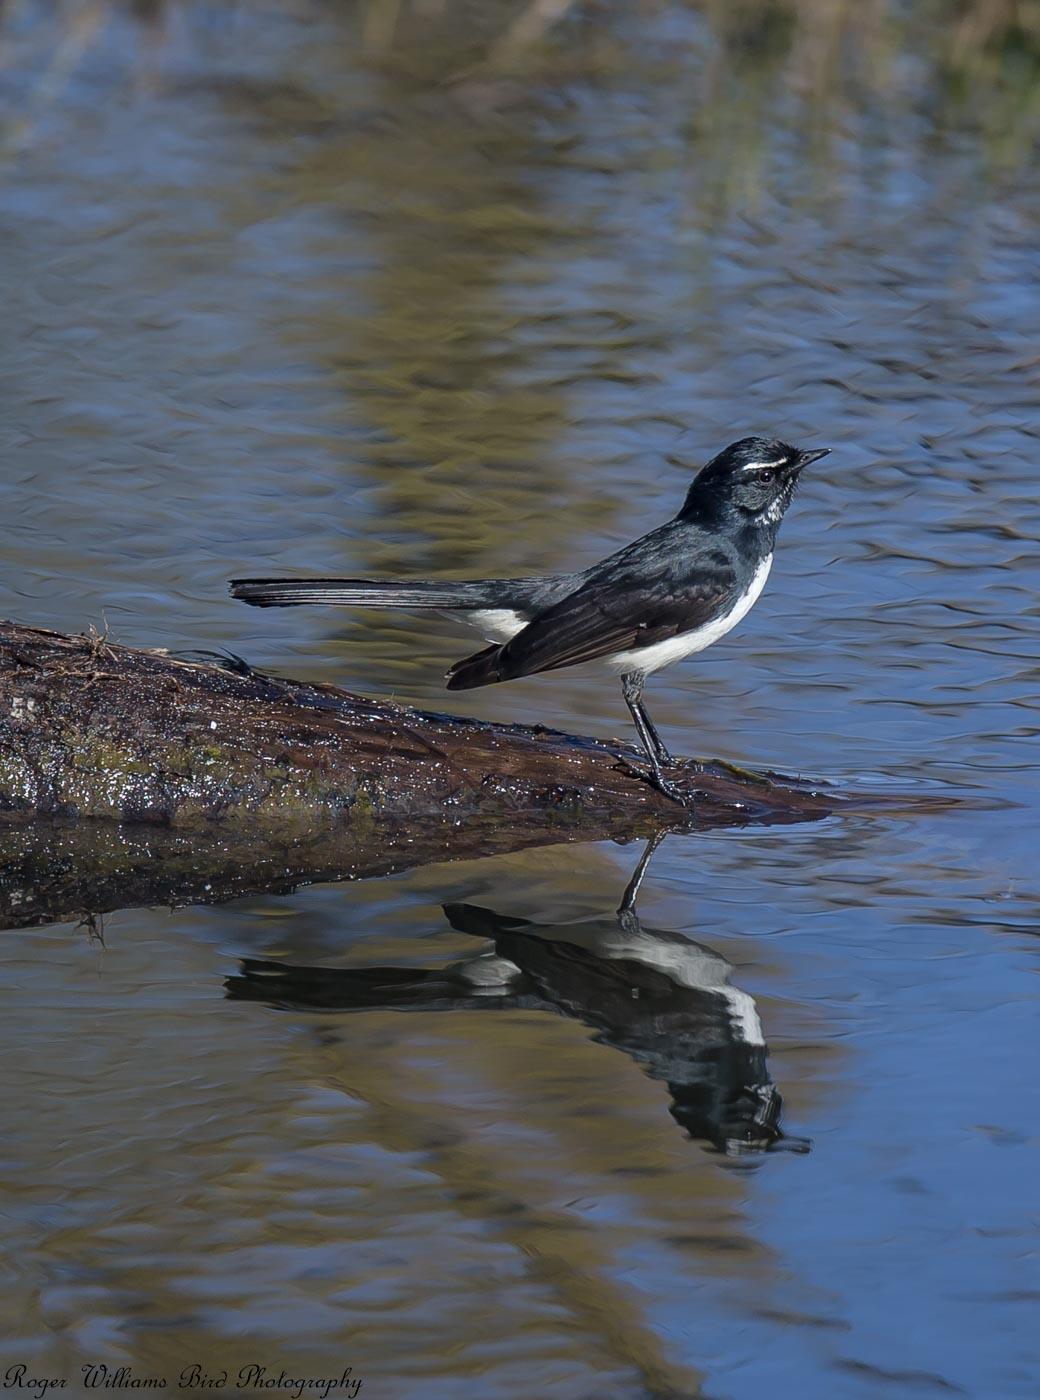 Willie-wagtail Photo by Roger Williams